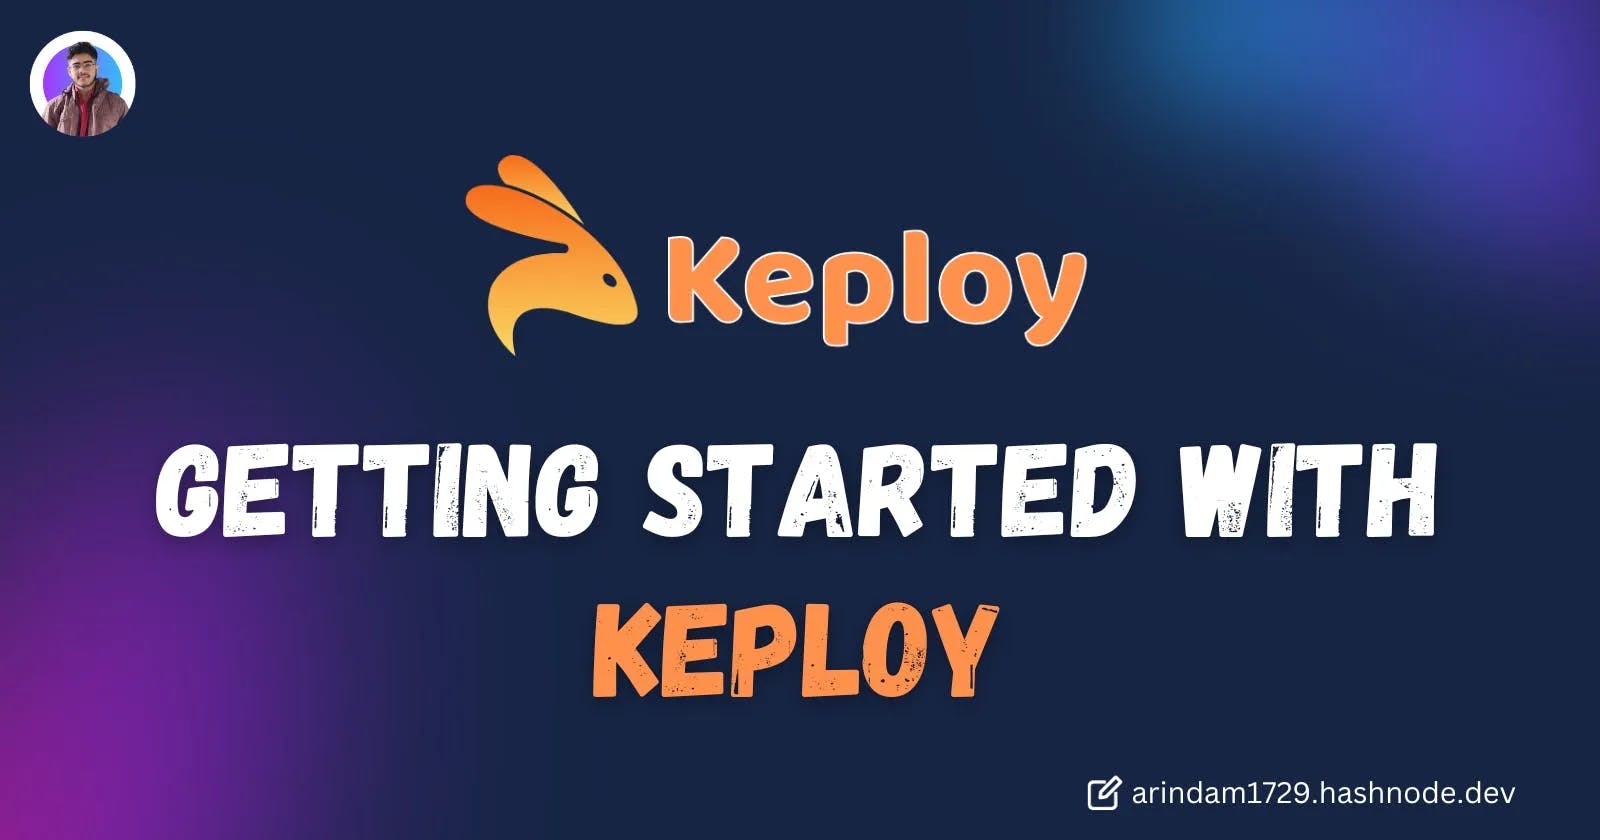 Cover Image for Getting Started with Keploy